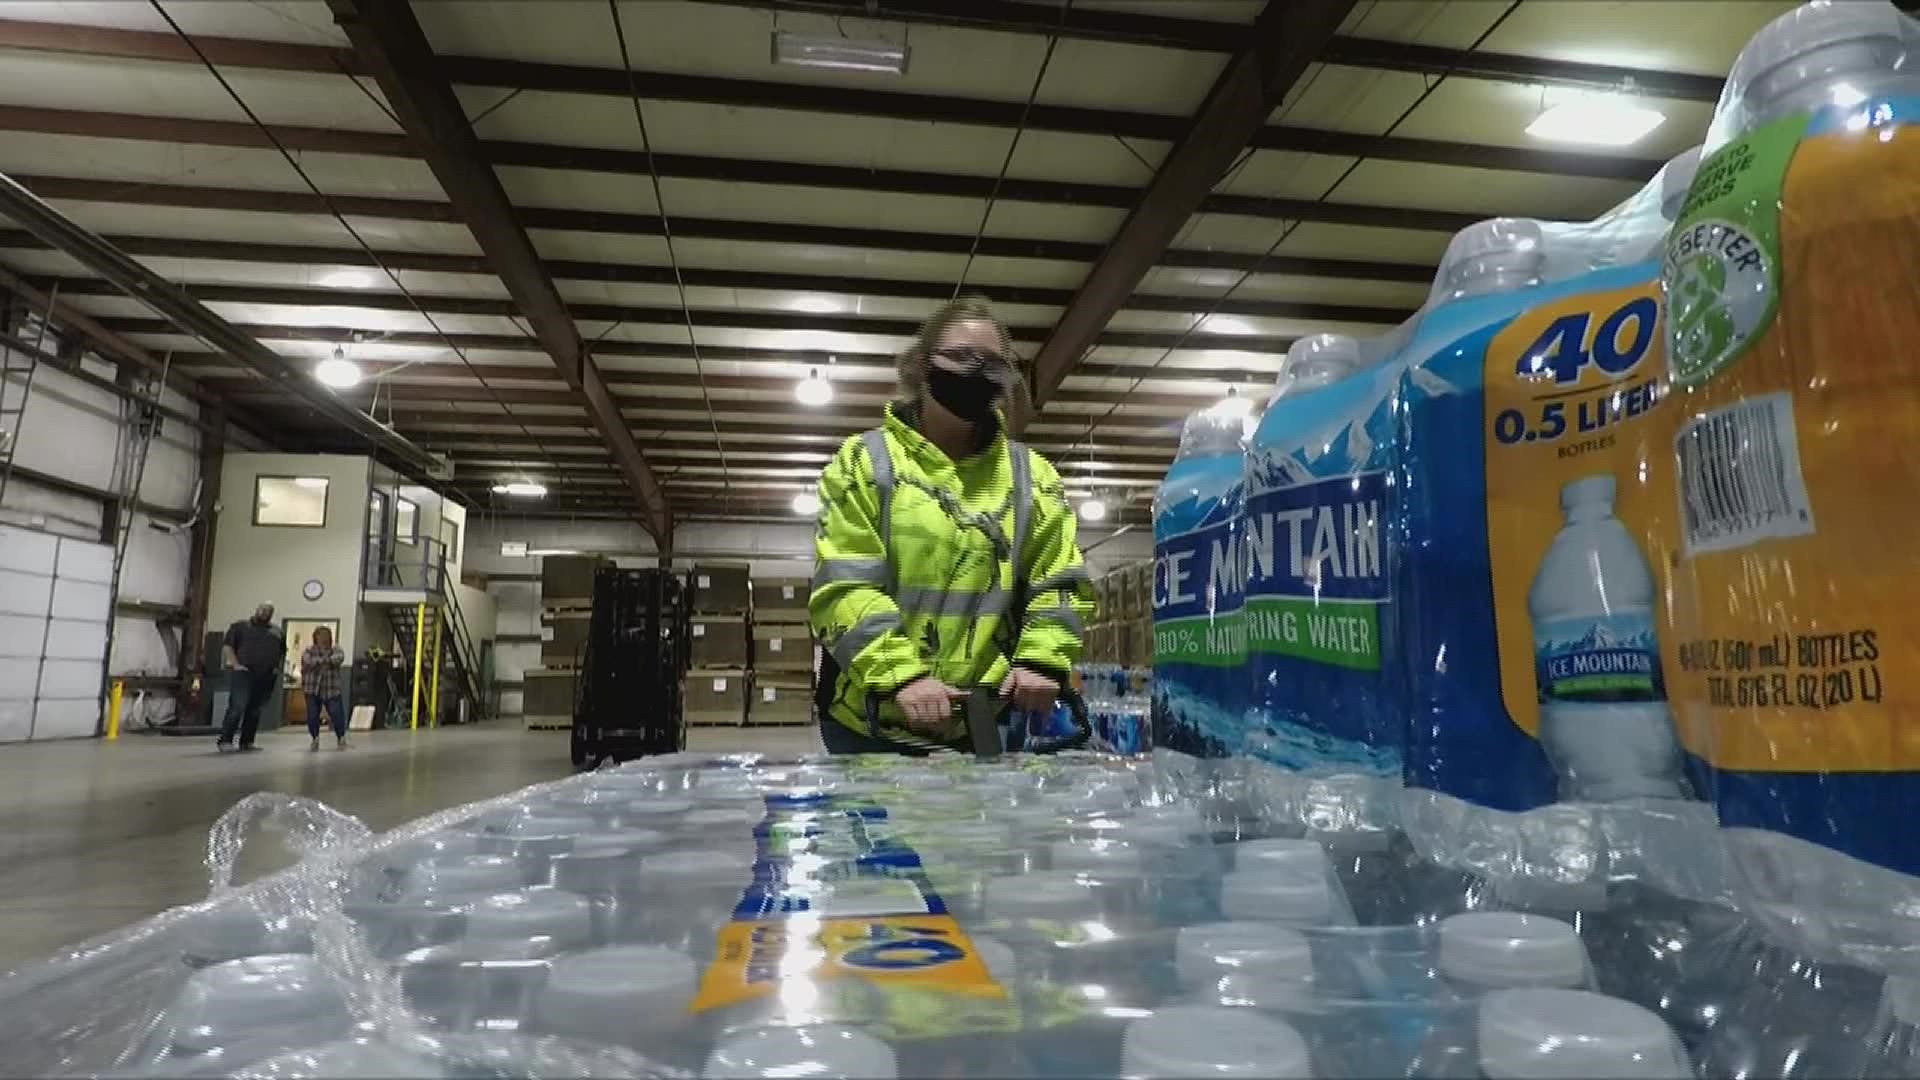 Water, Food, clothing, and more are going to help people in need after the devastating tornadoes.